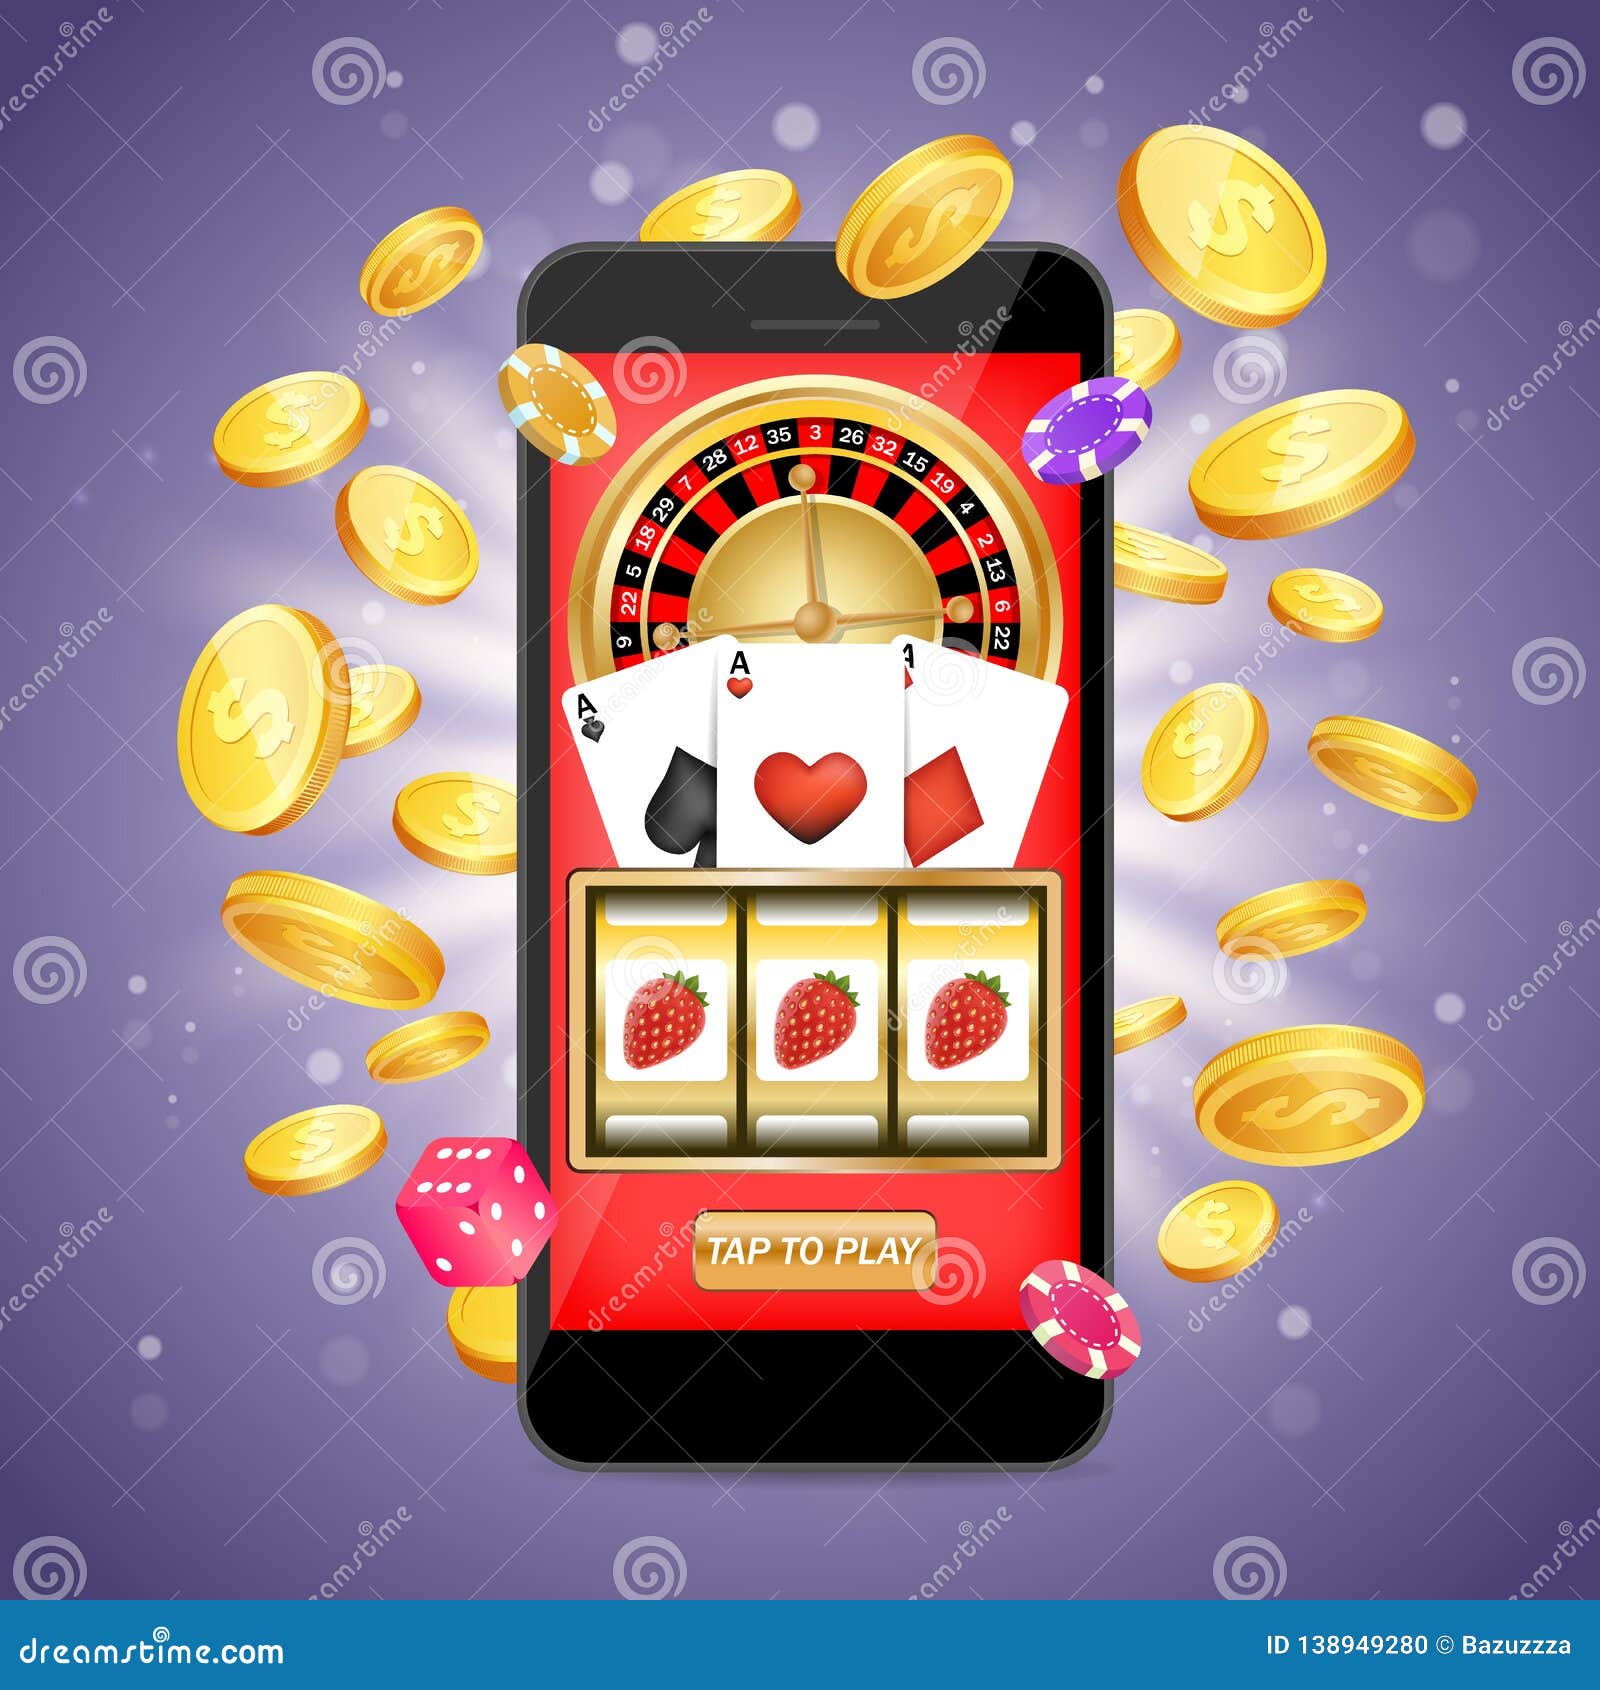 Fall In Love With slot